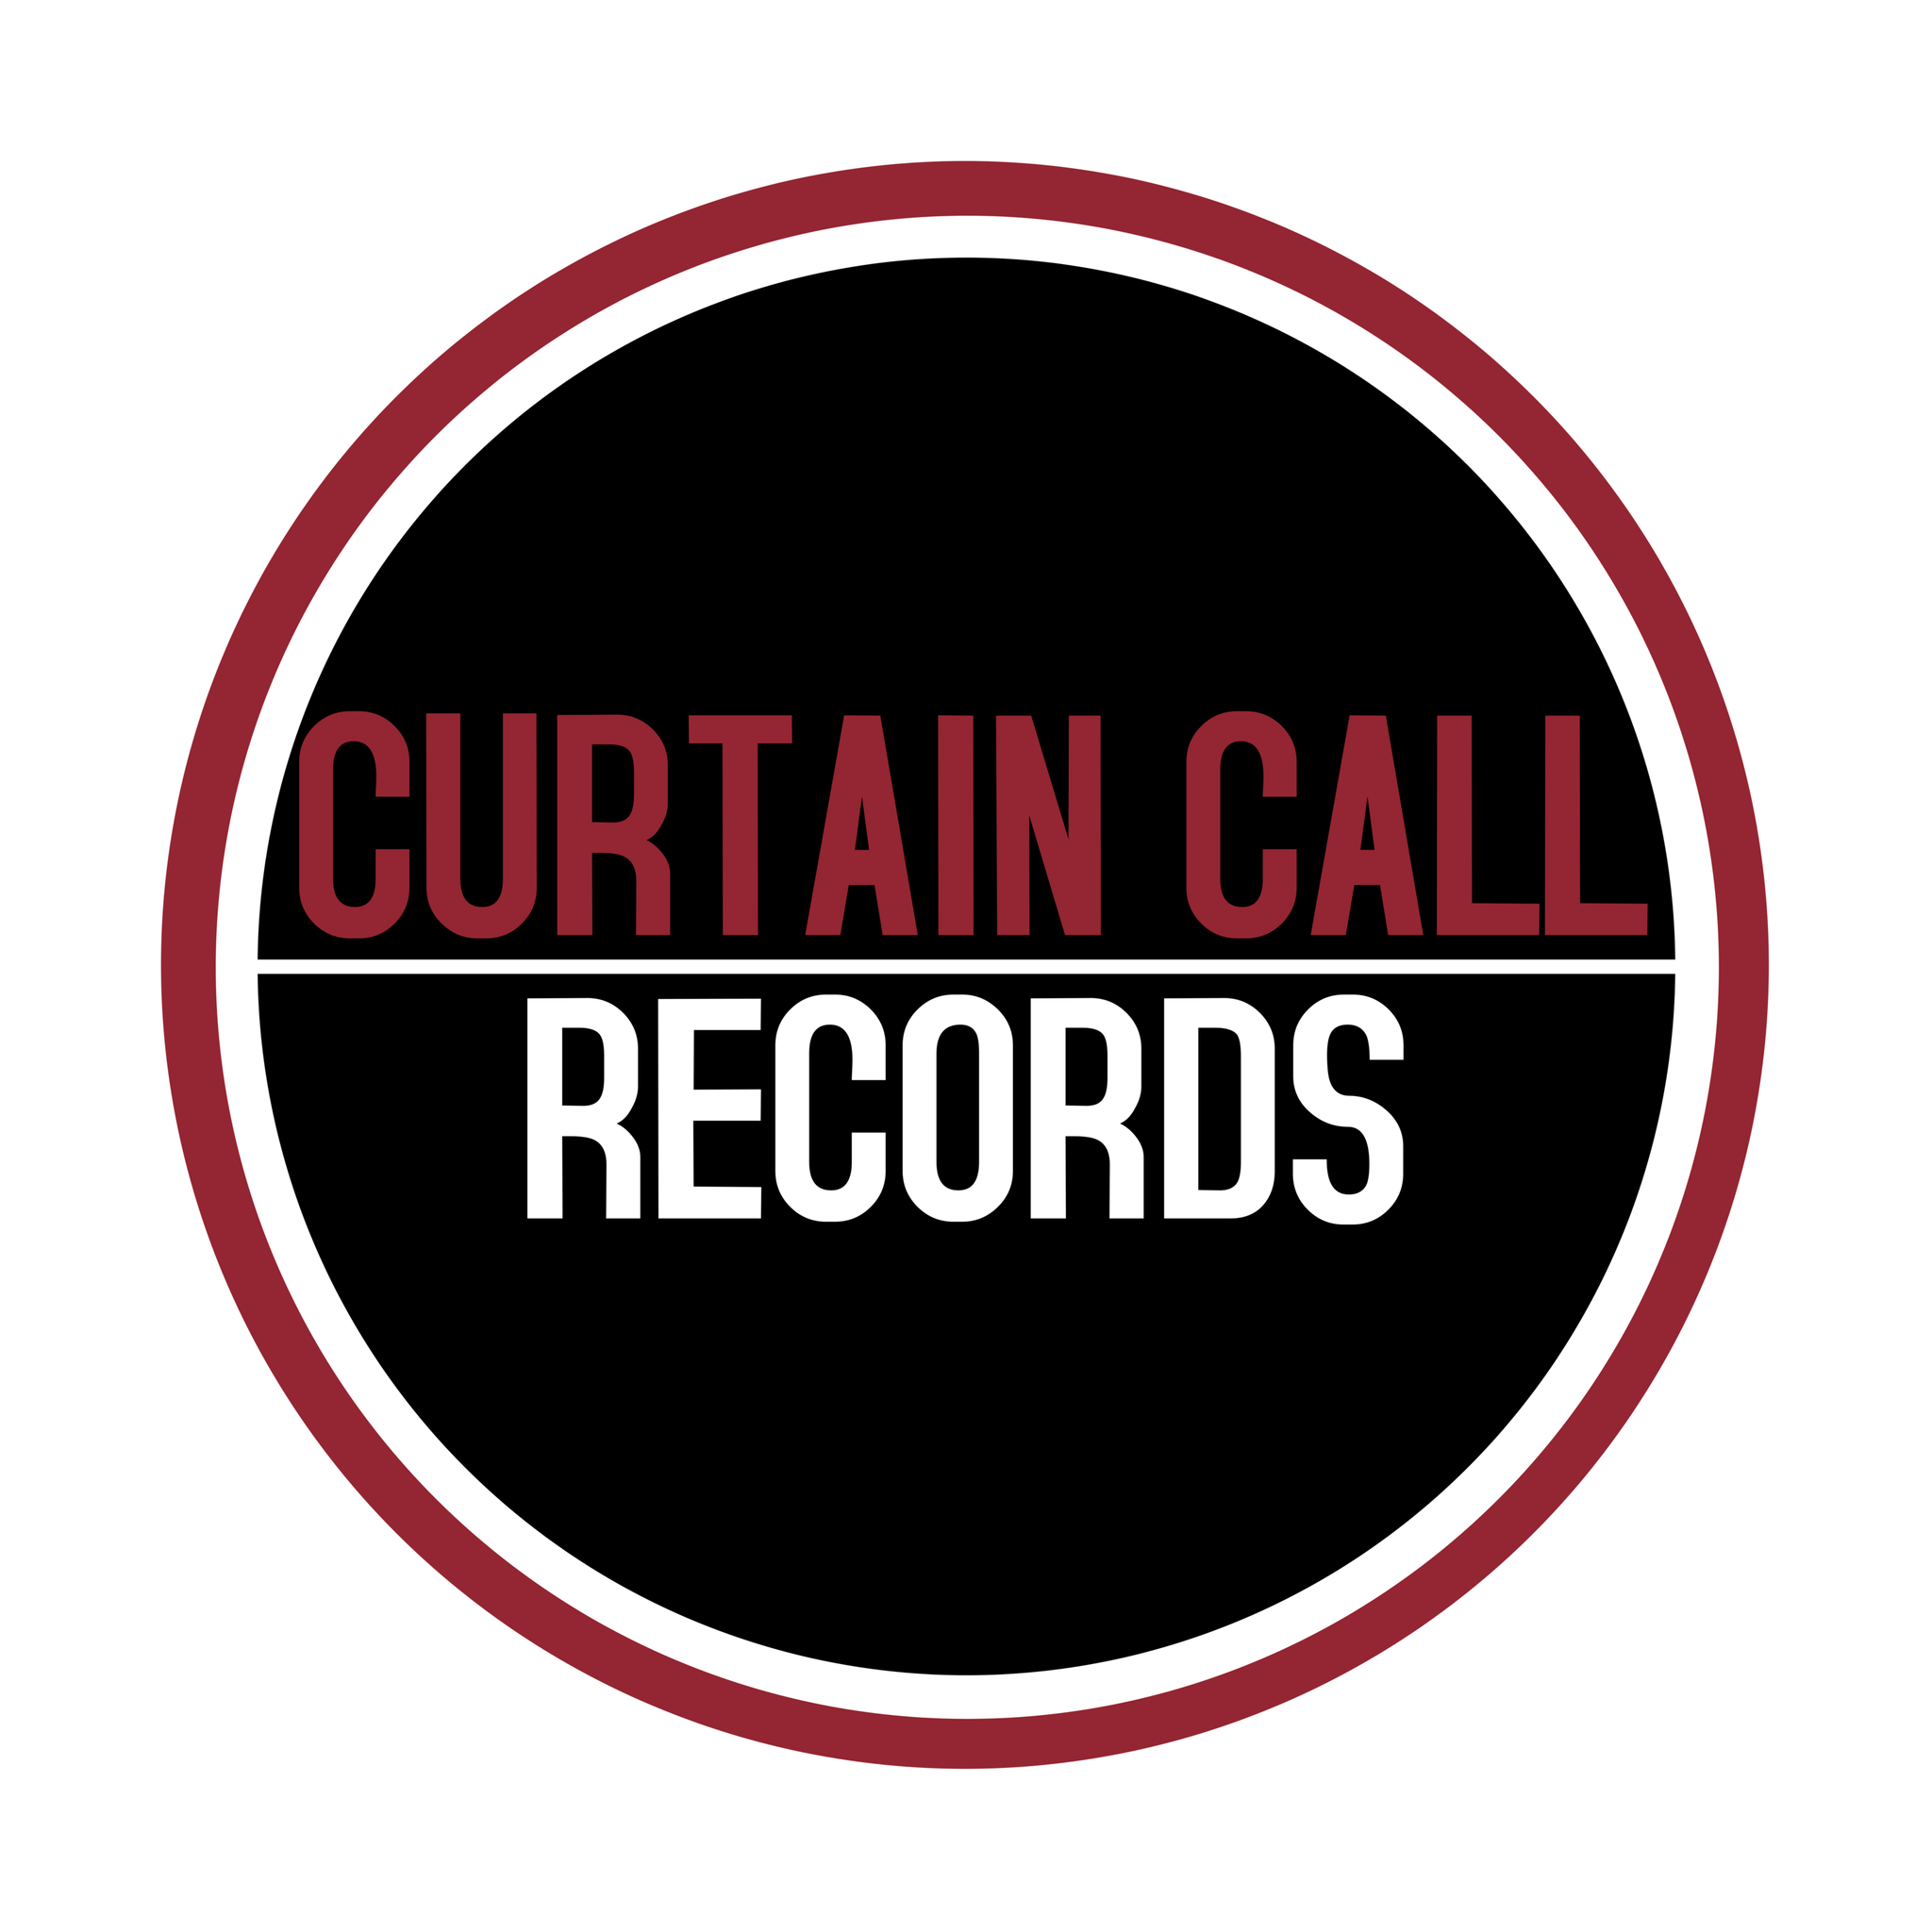 Curtain Call Records